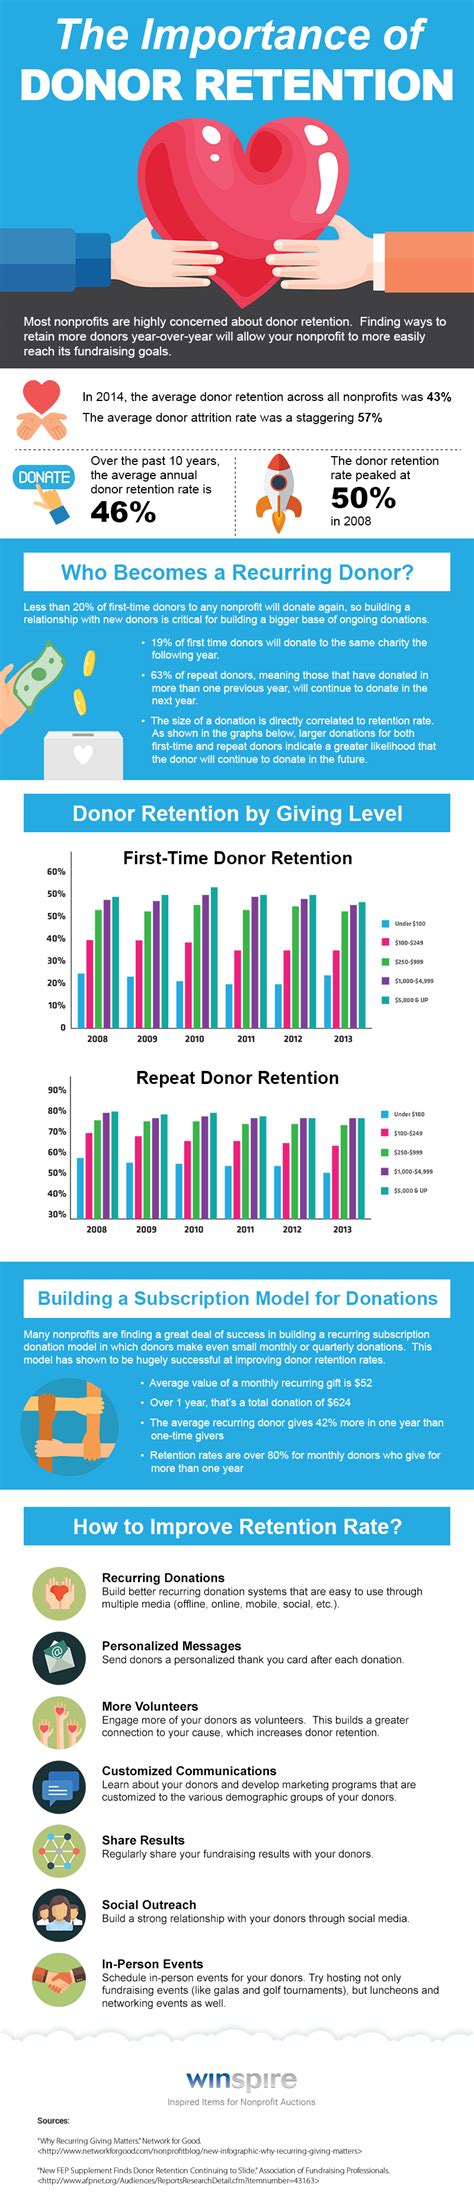 Donor Retention Sinks In 2017 How To Increase Your Rates Infographic